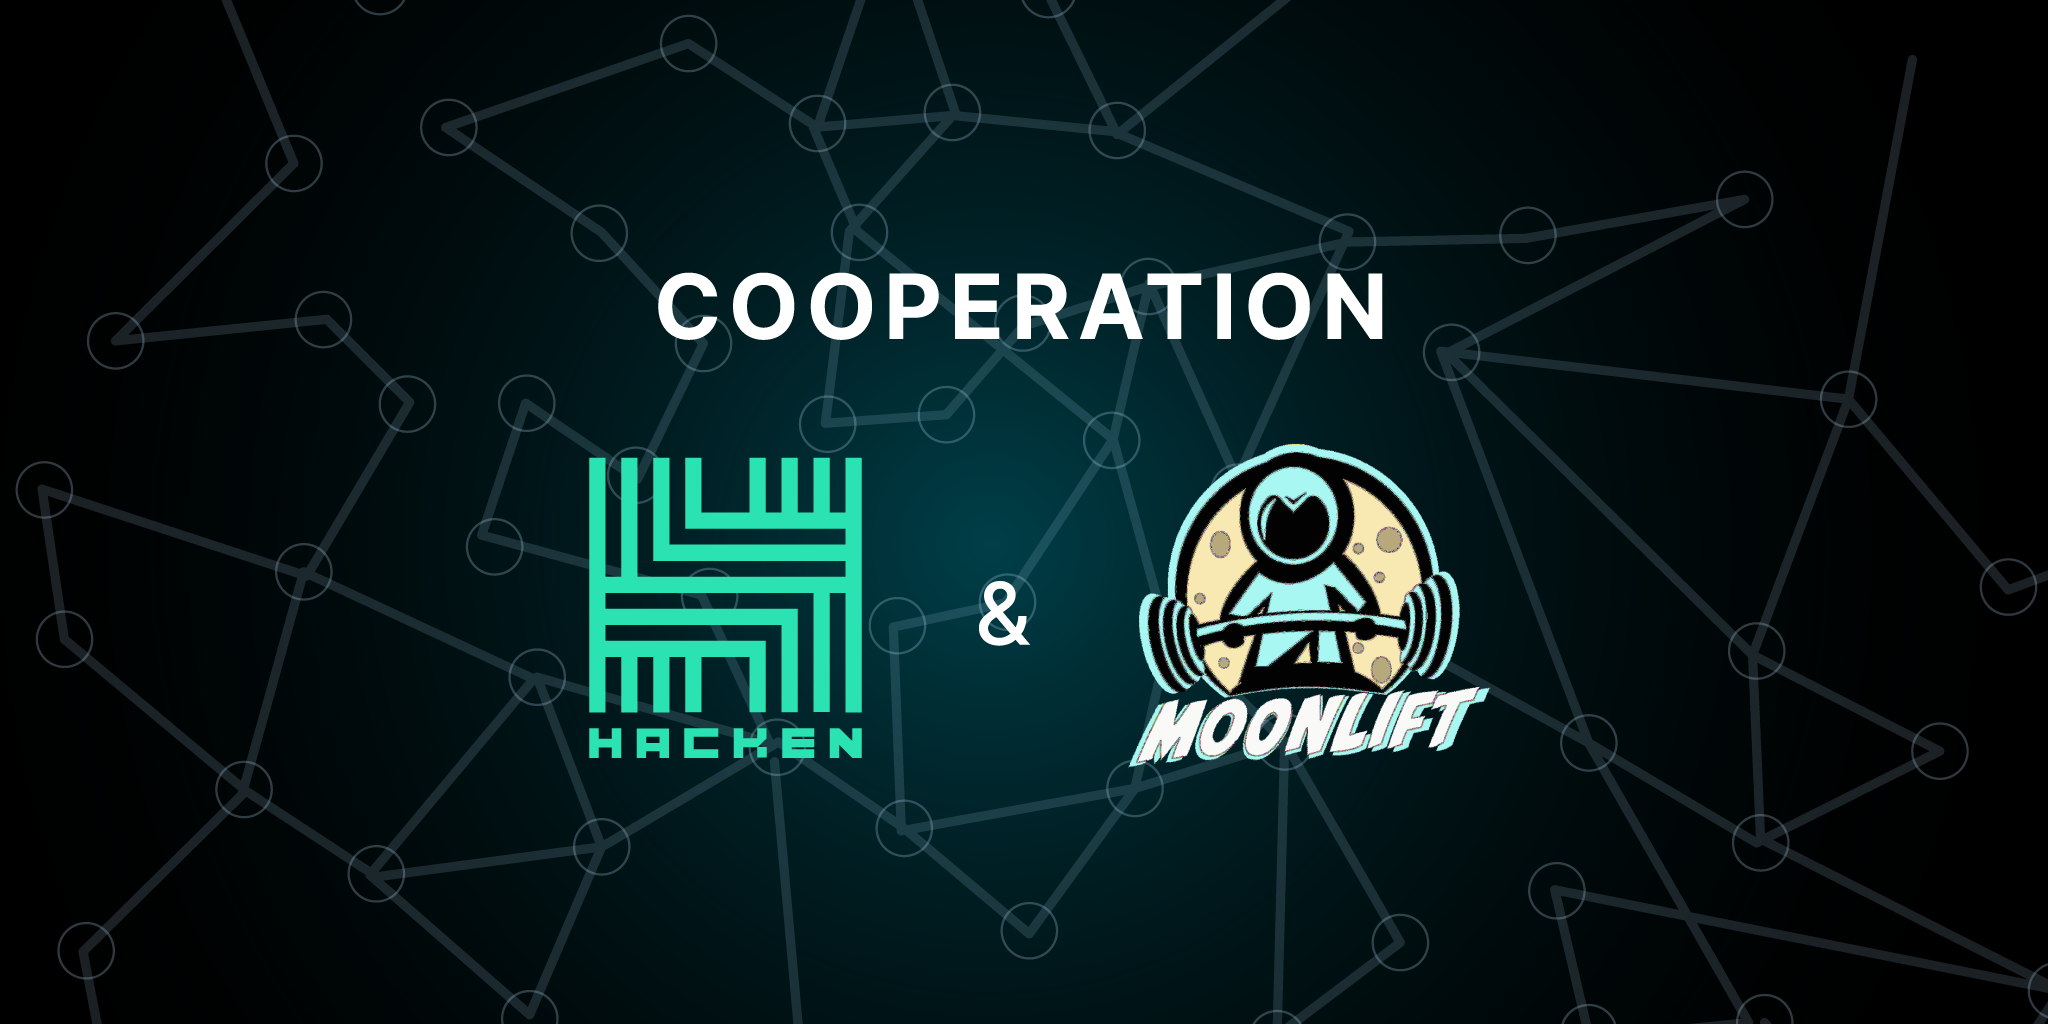 MoonLift cooperates with Hacken to address digital threats